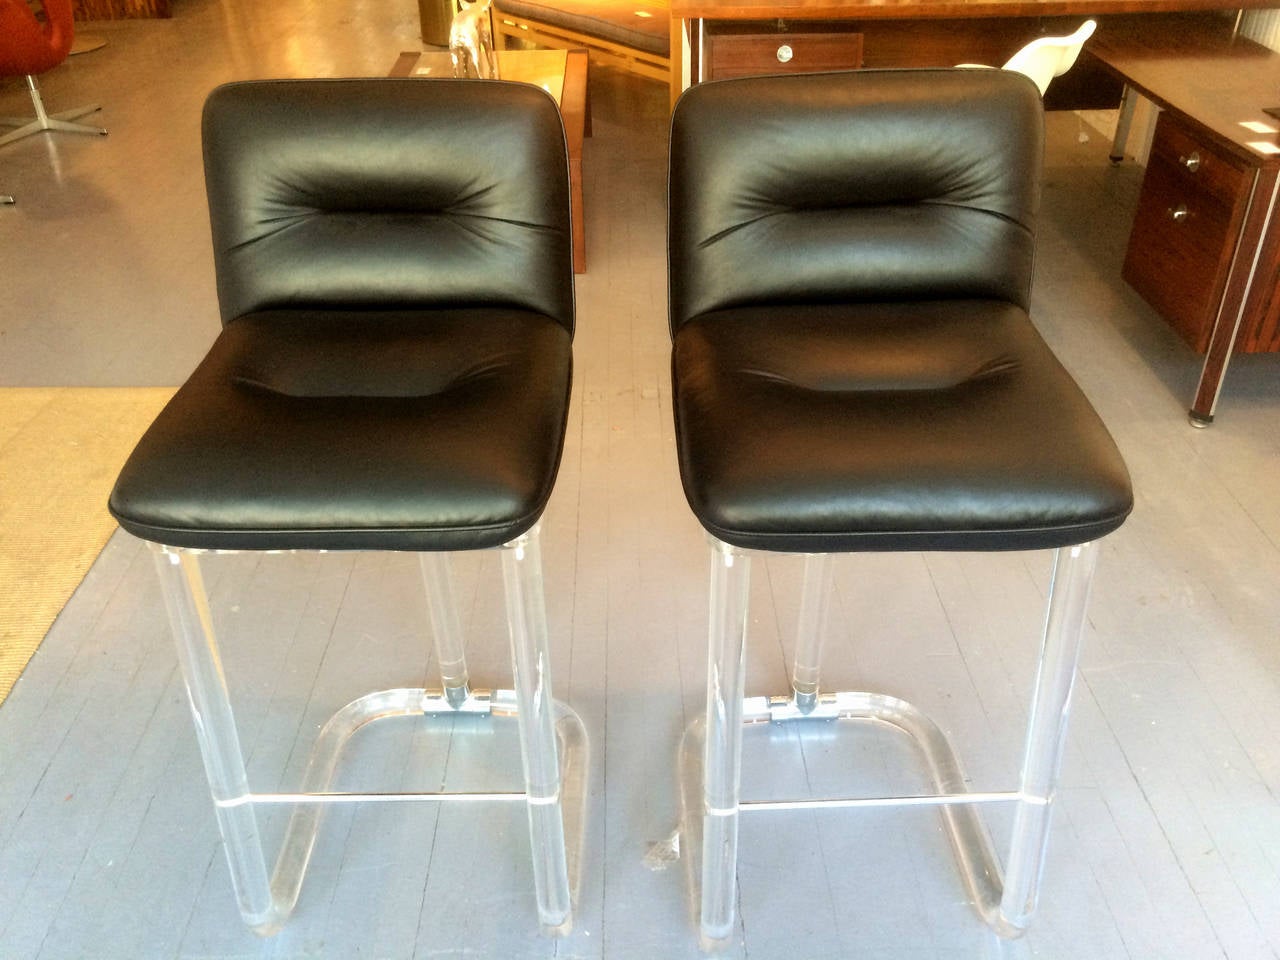 A pair of high chair or bar stools designed by Lion in frost circa 1970s. Thick lucite tubular frames with the signature T shape chromed metal connecting hardware in the back, these chairs are functional and elegant-looking from all angels. The